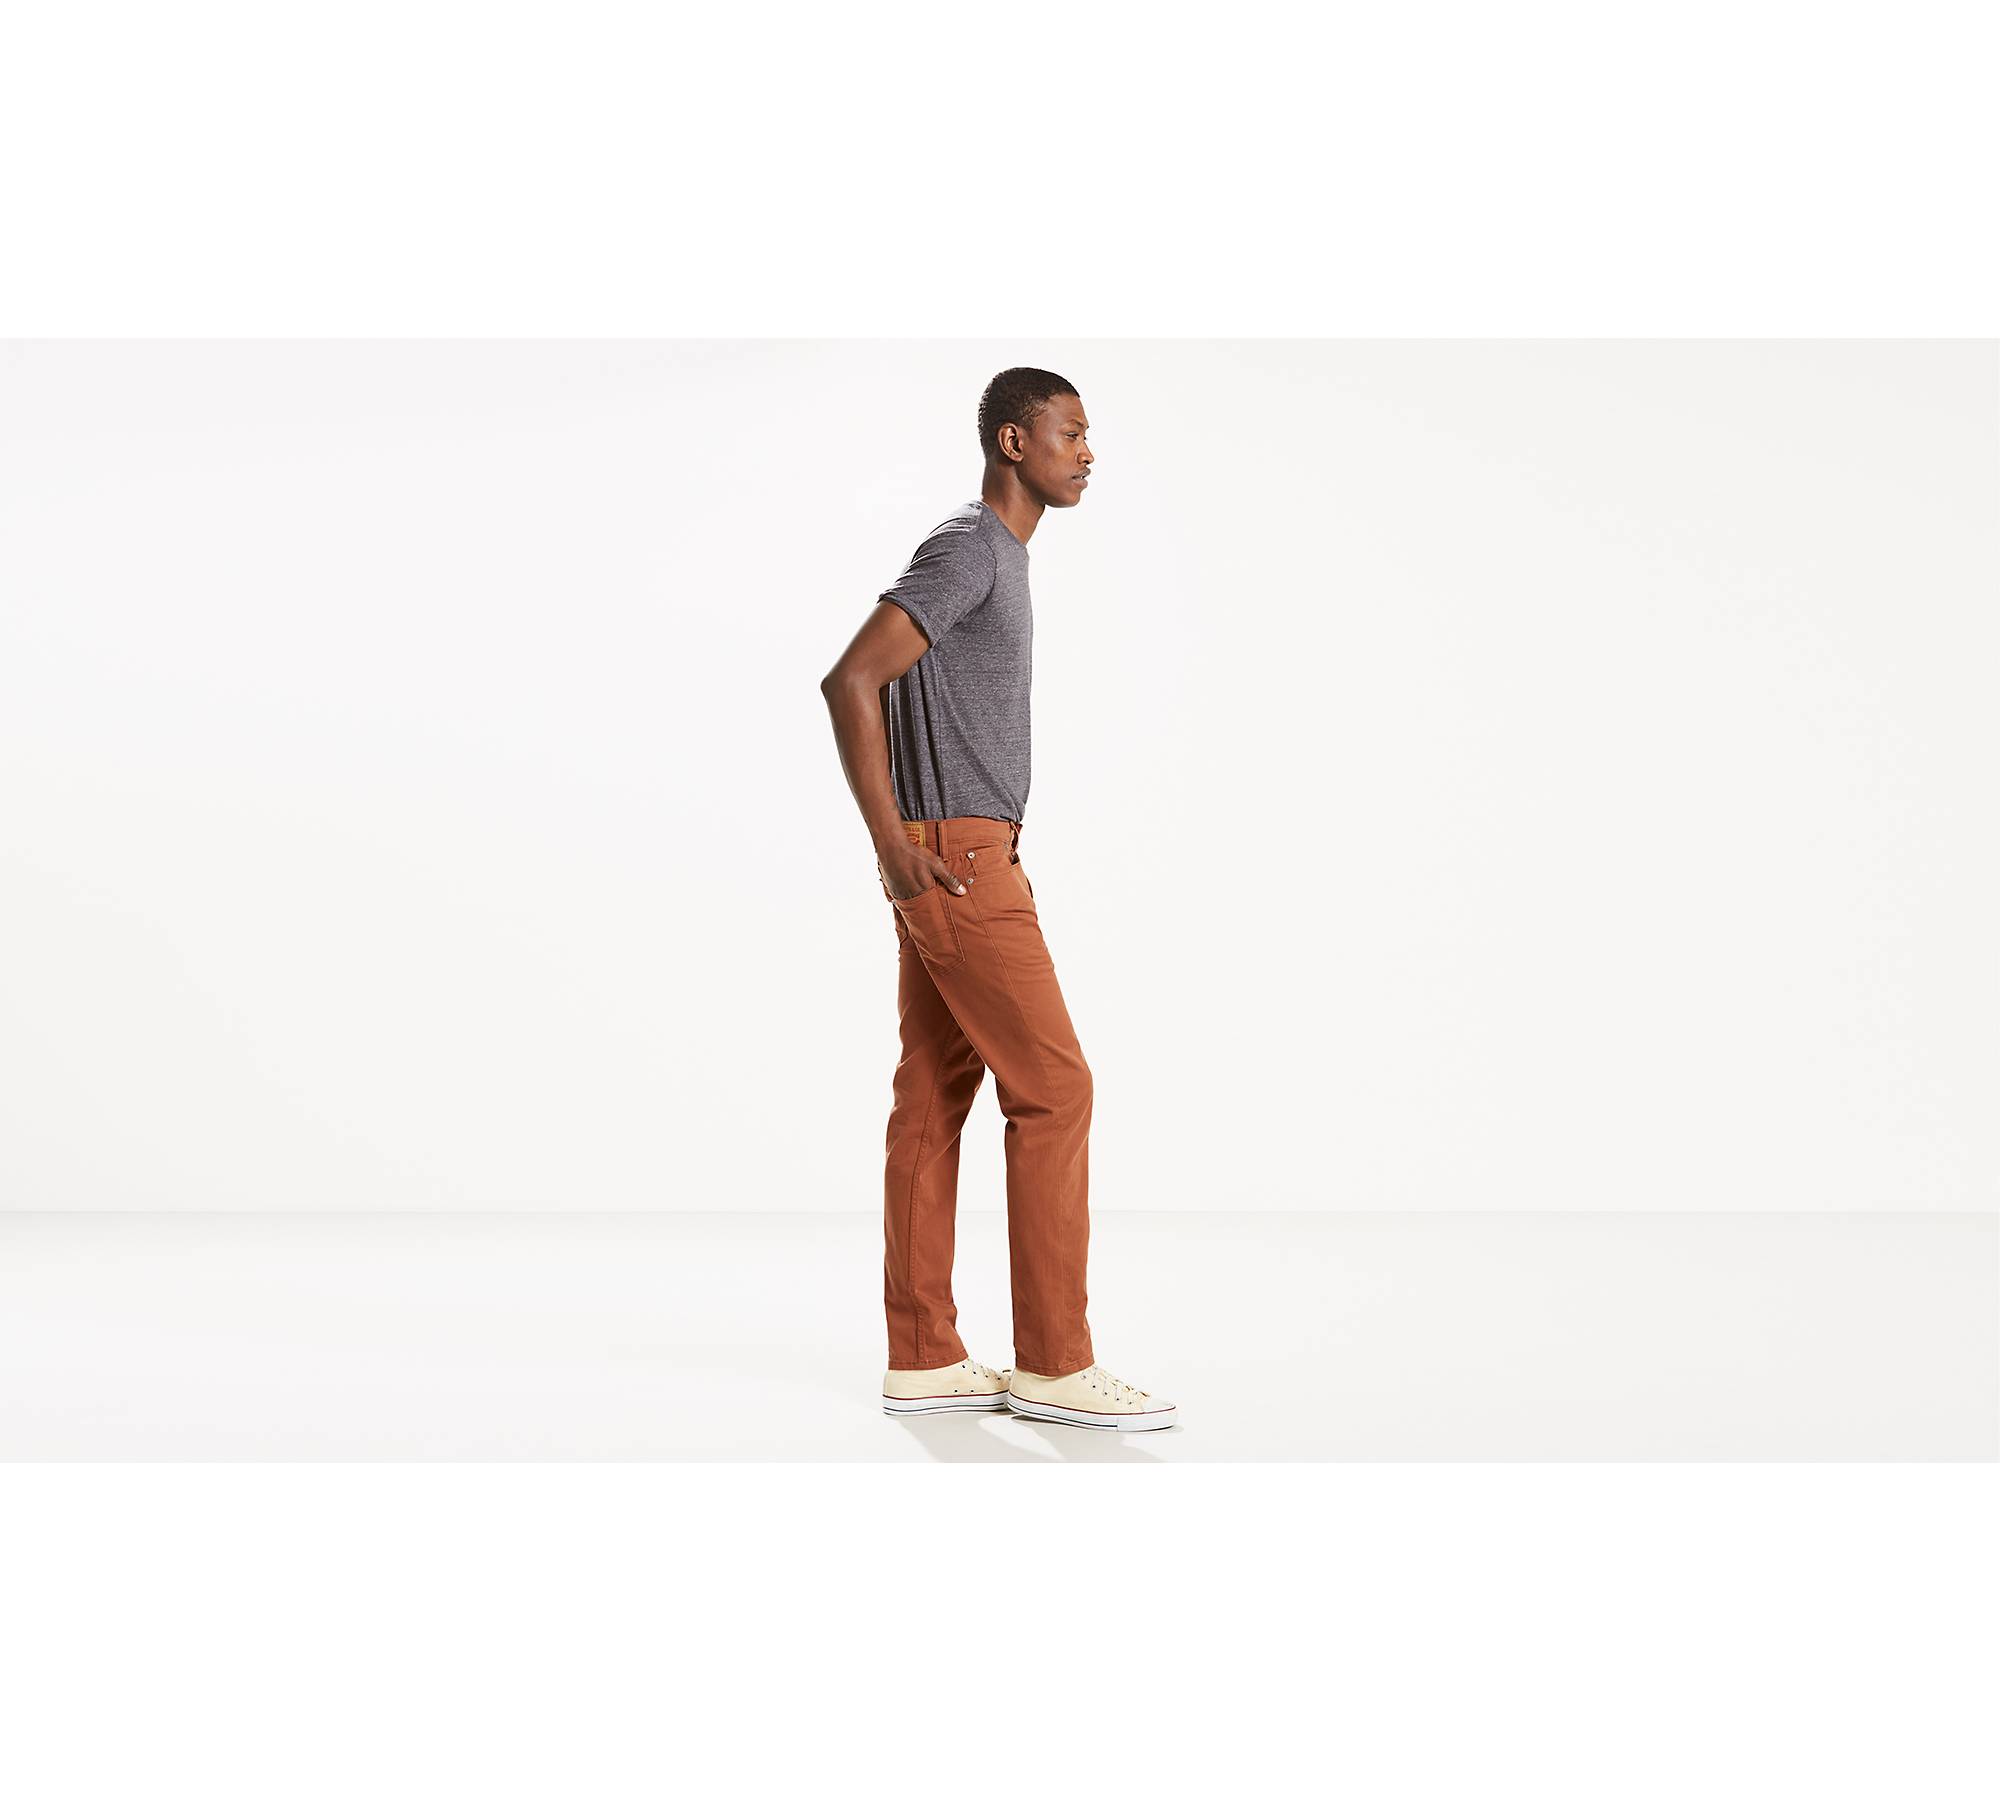 Chaps Straight Fit Stretch Twill 5-pocket Pants, Pants